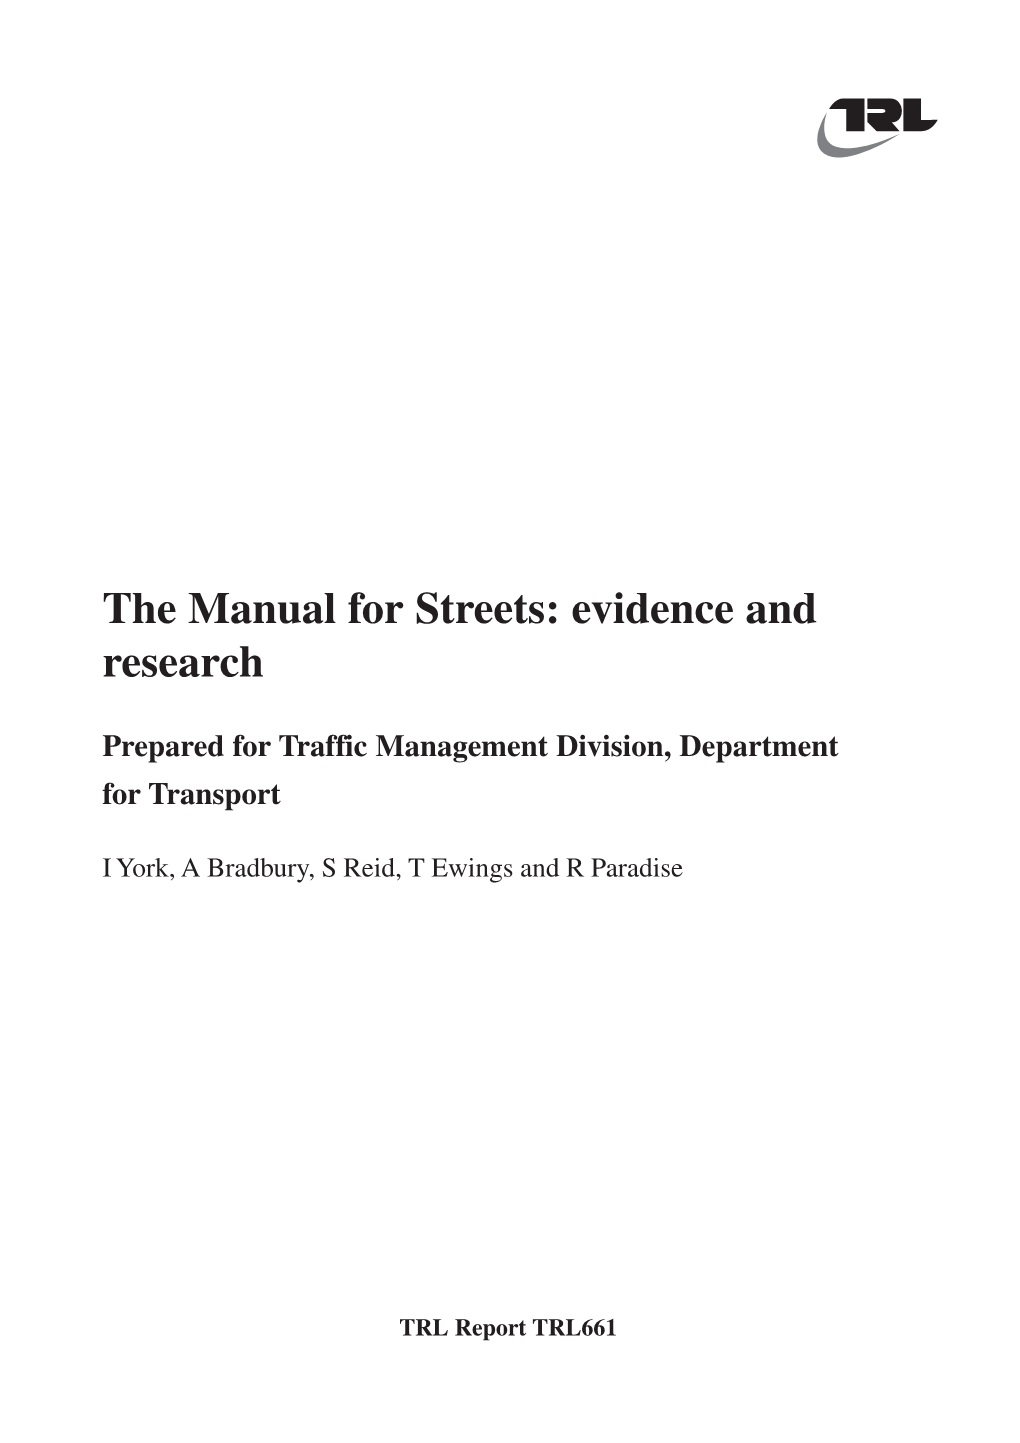 The Manual for Streets: Evidence and Research